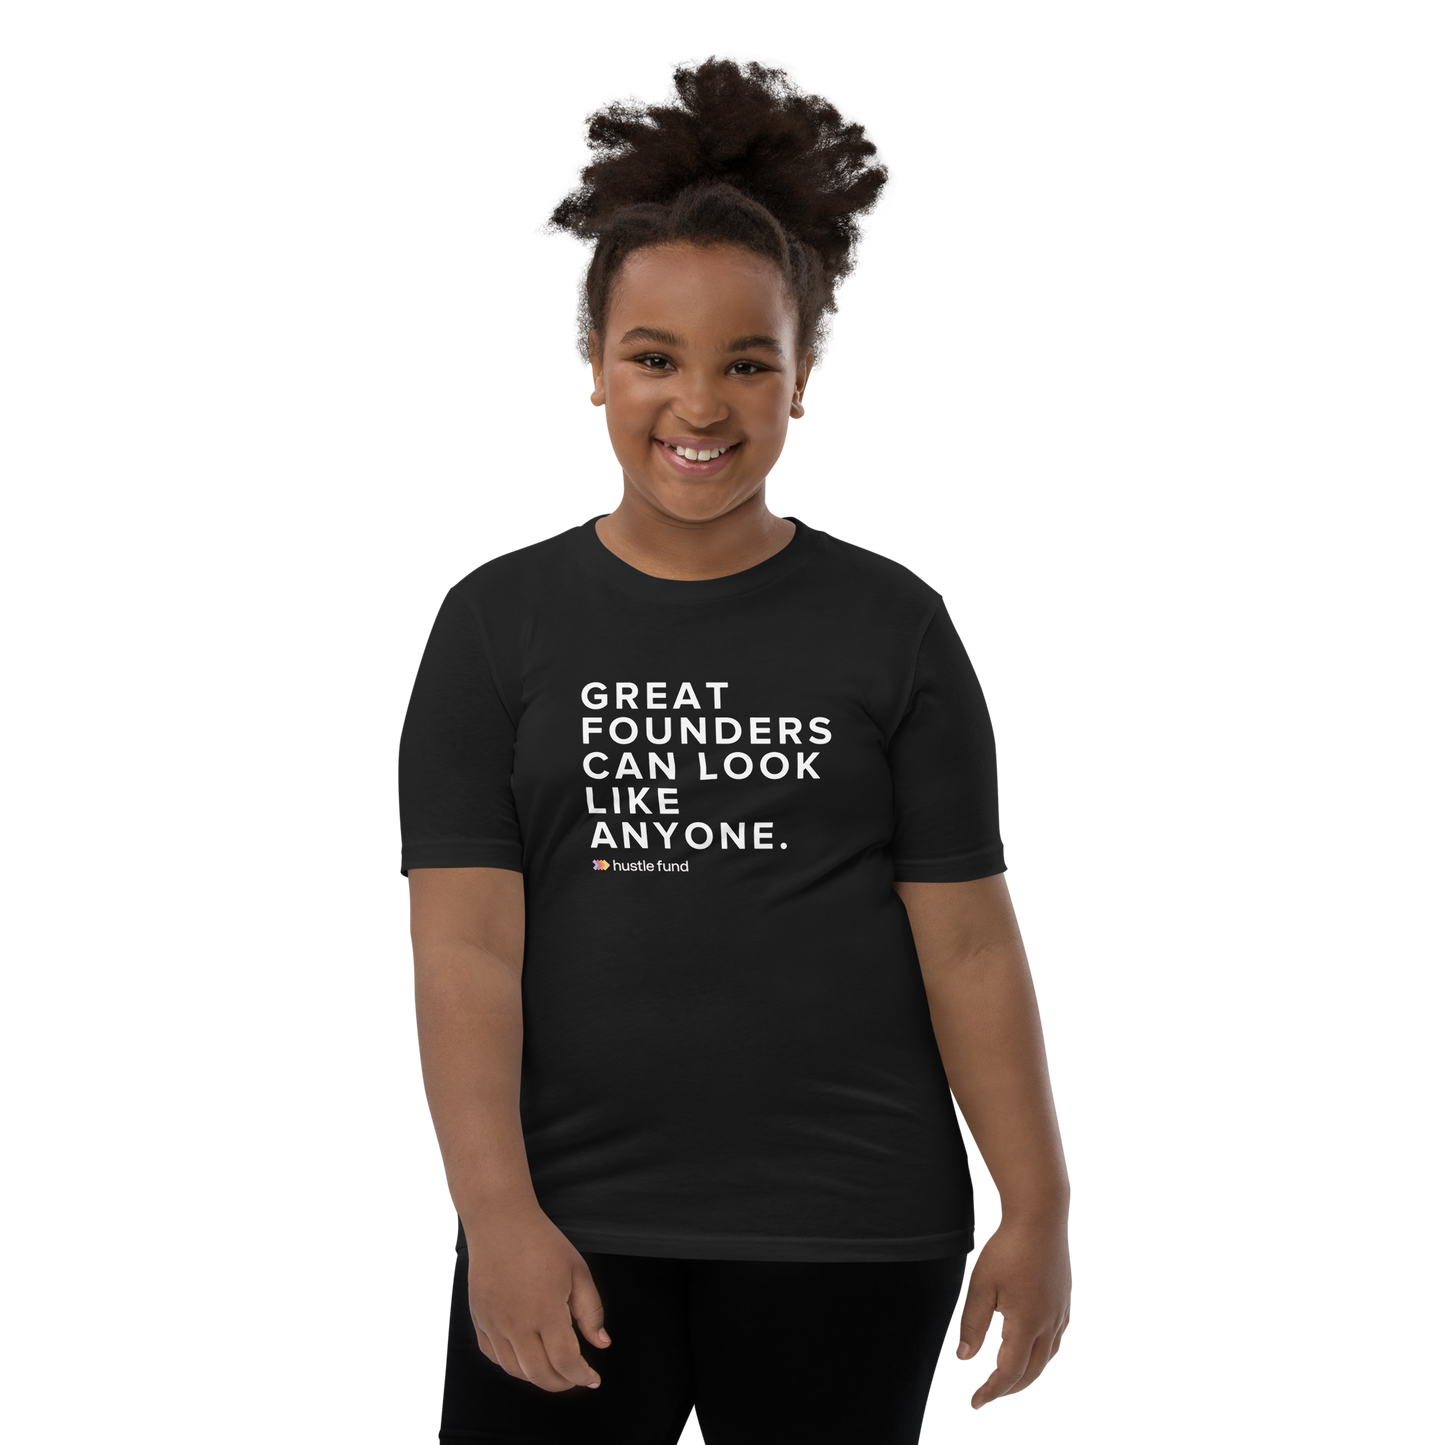 Great Founders Can Look Like Anyone Youth Unisex T-Shirt